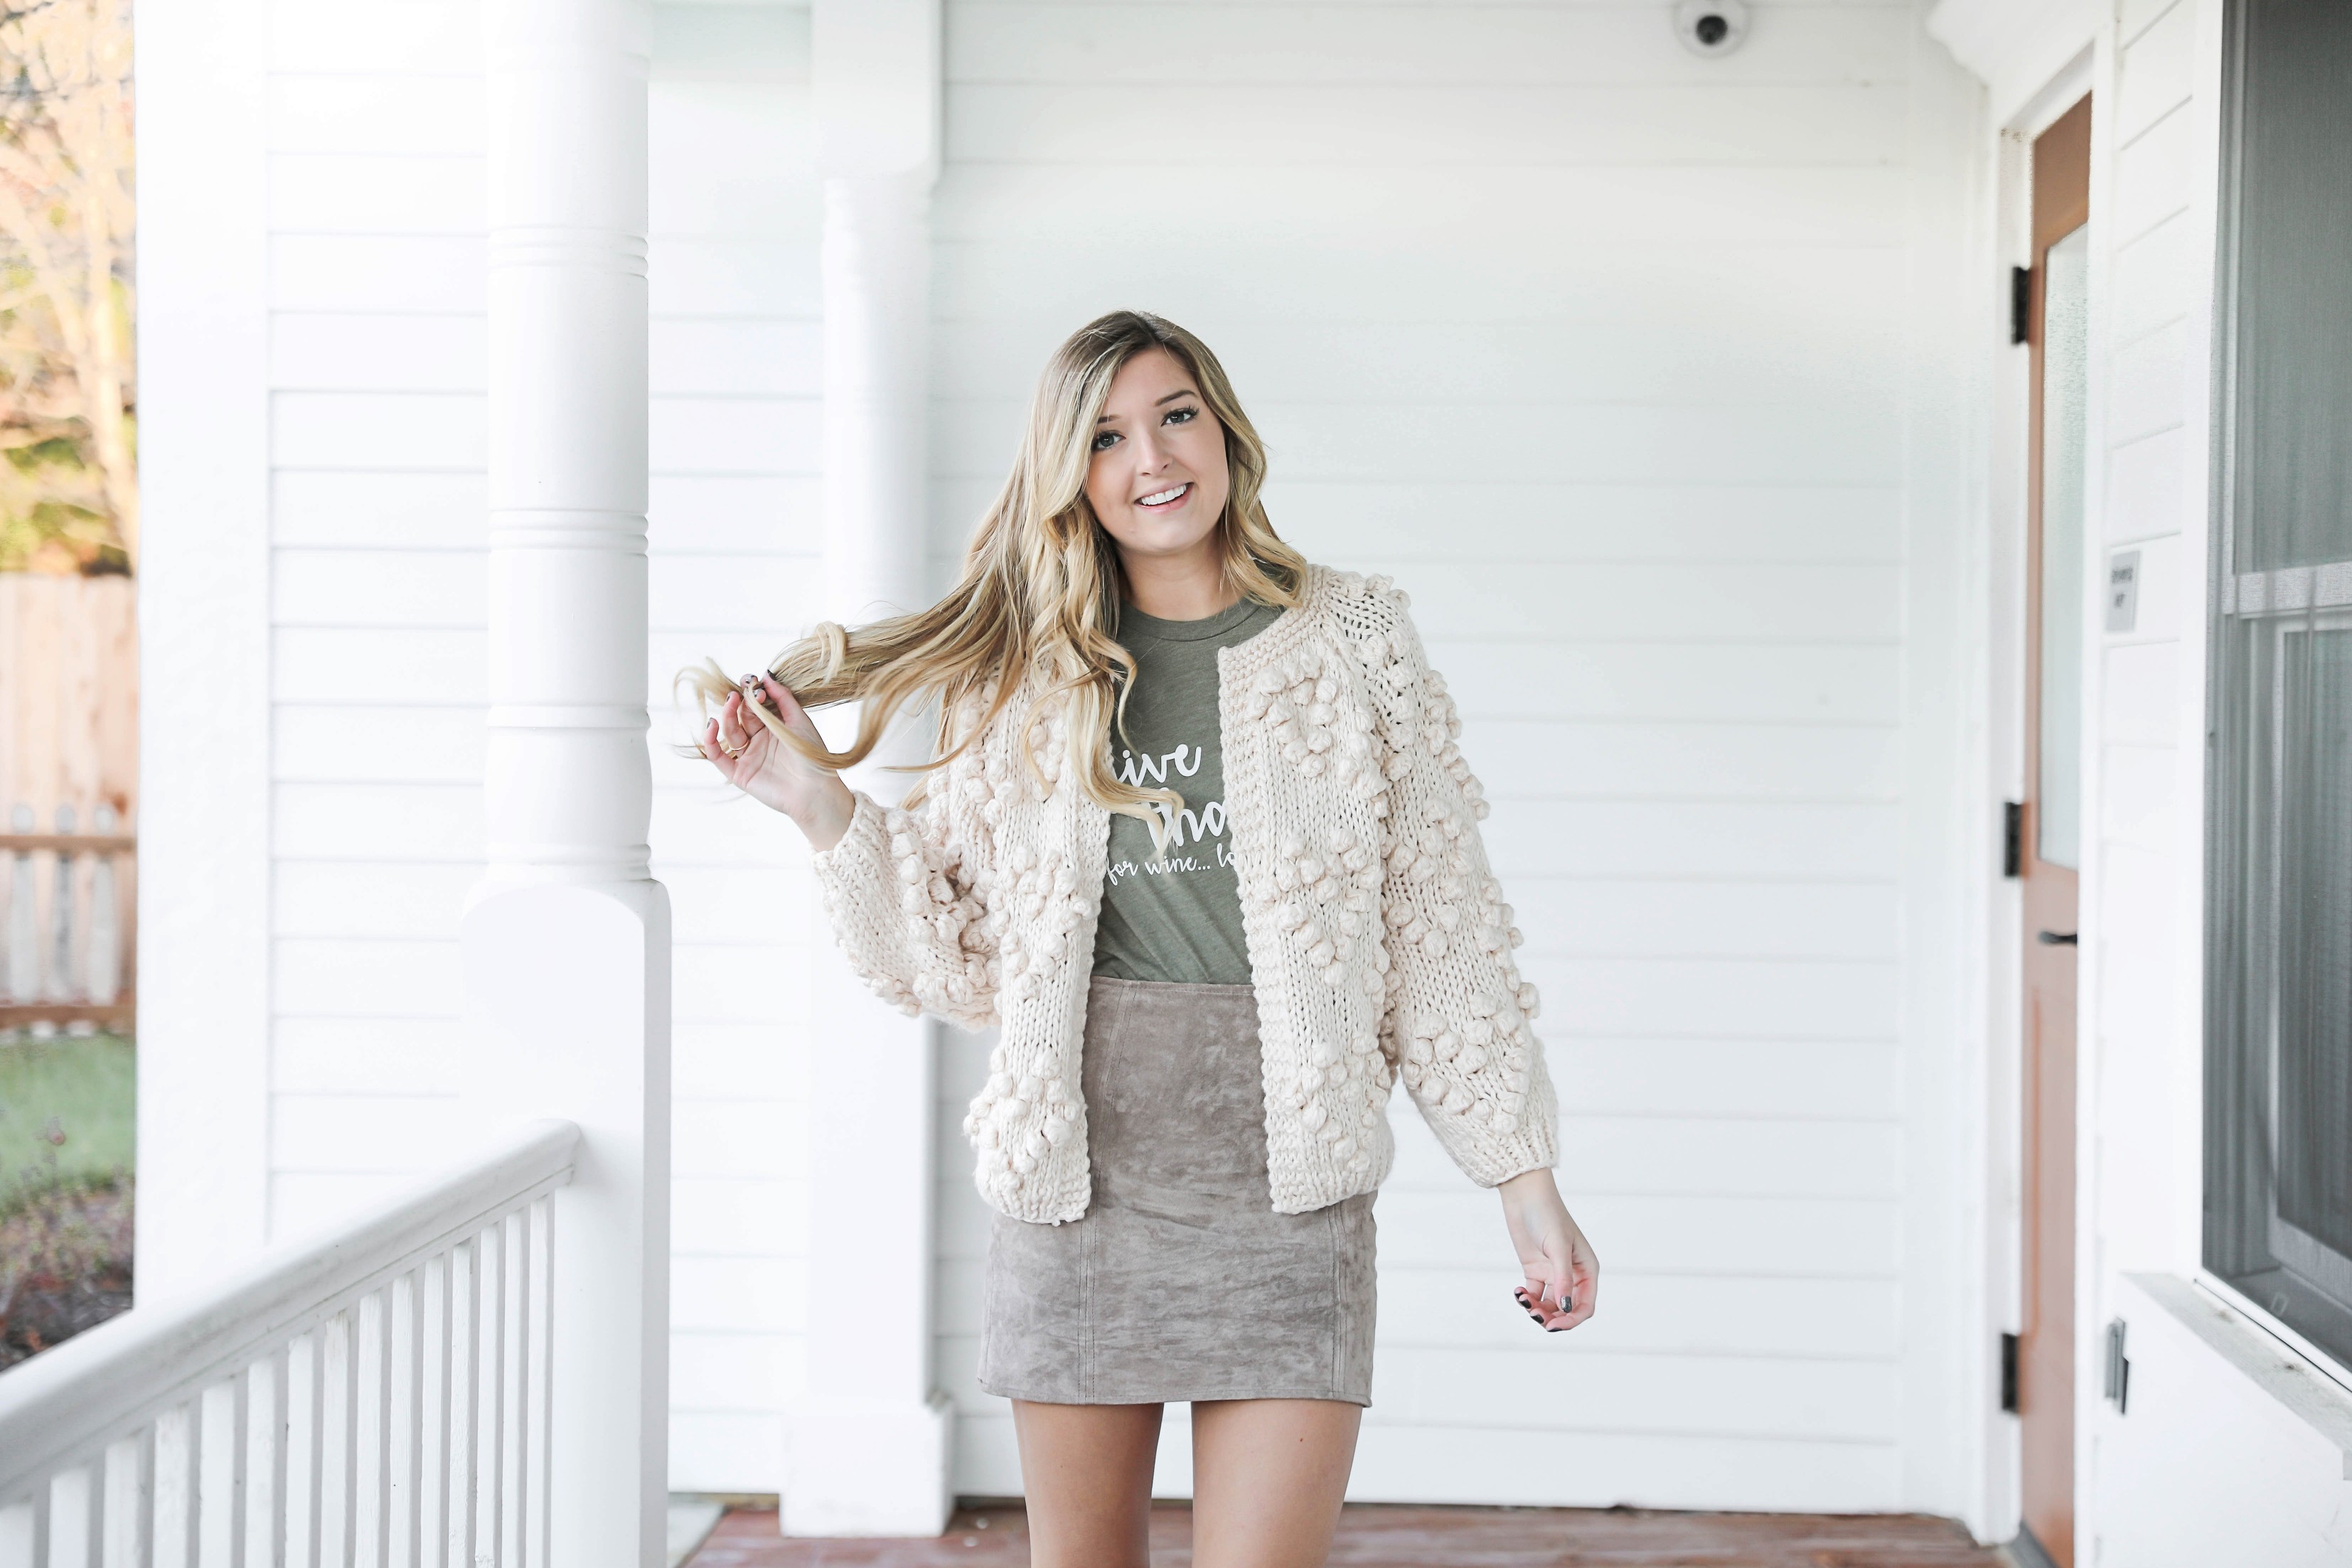 Thanksgiving outfit idea! Thanksgiving look, I love this t-shirt that says thankful for wine! The olive color shirt is so cute for this time of year and looks so good with the suede skirt and pom cardigan! Details on fashion blog daily dose of charm by lauren lindmark